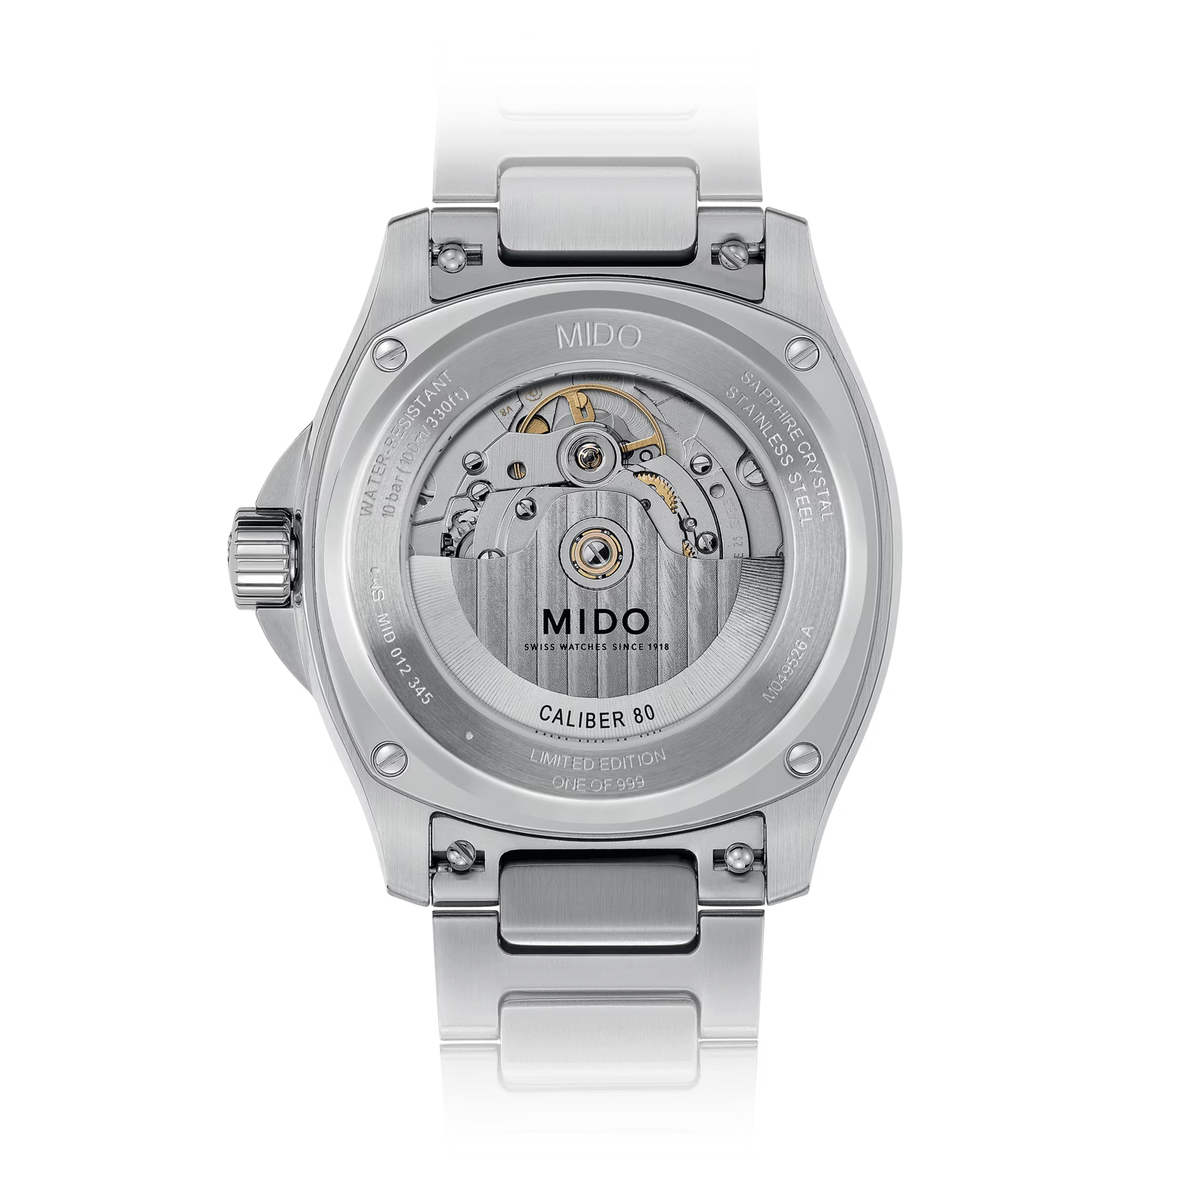 Mido Multifort TV Big Date Limited Edition M049.526.11.081.01